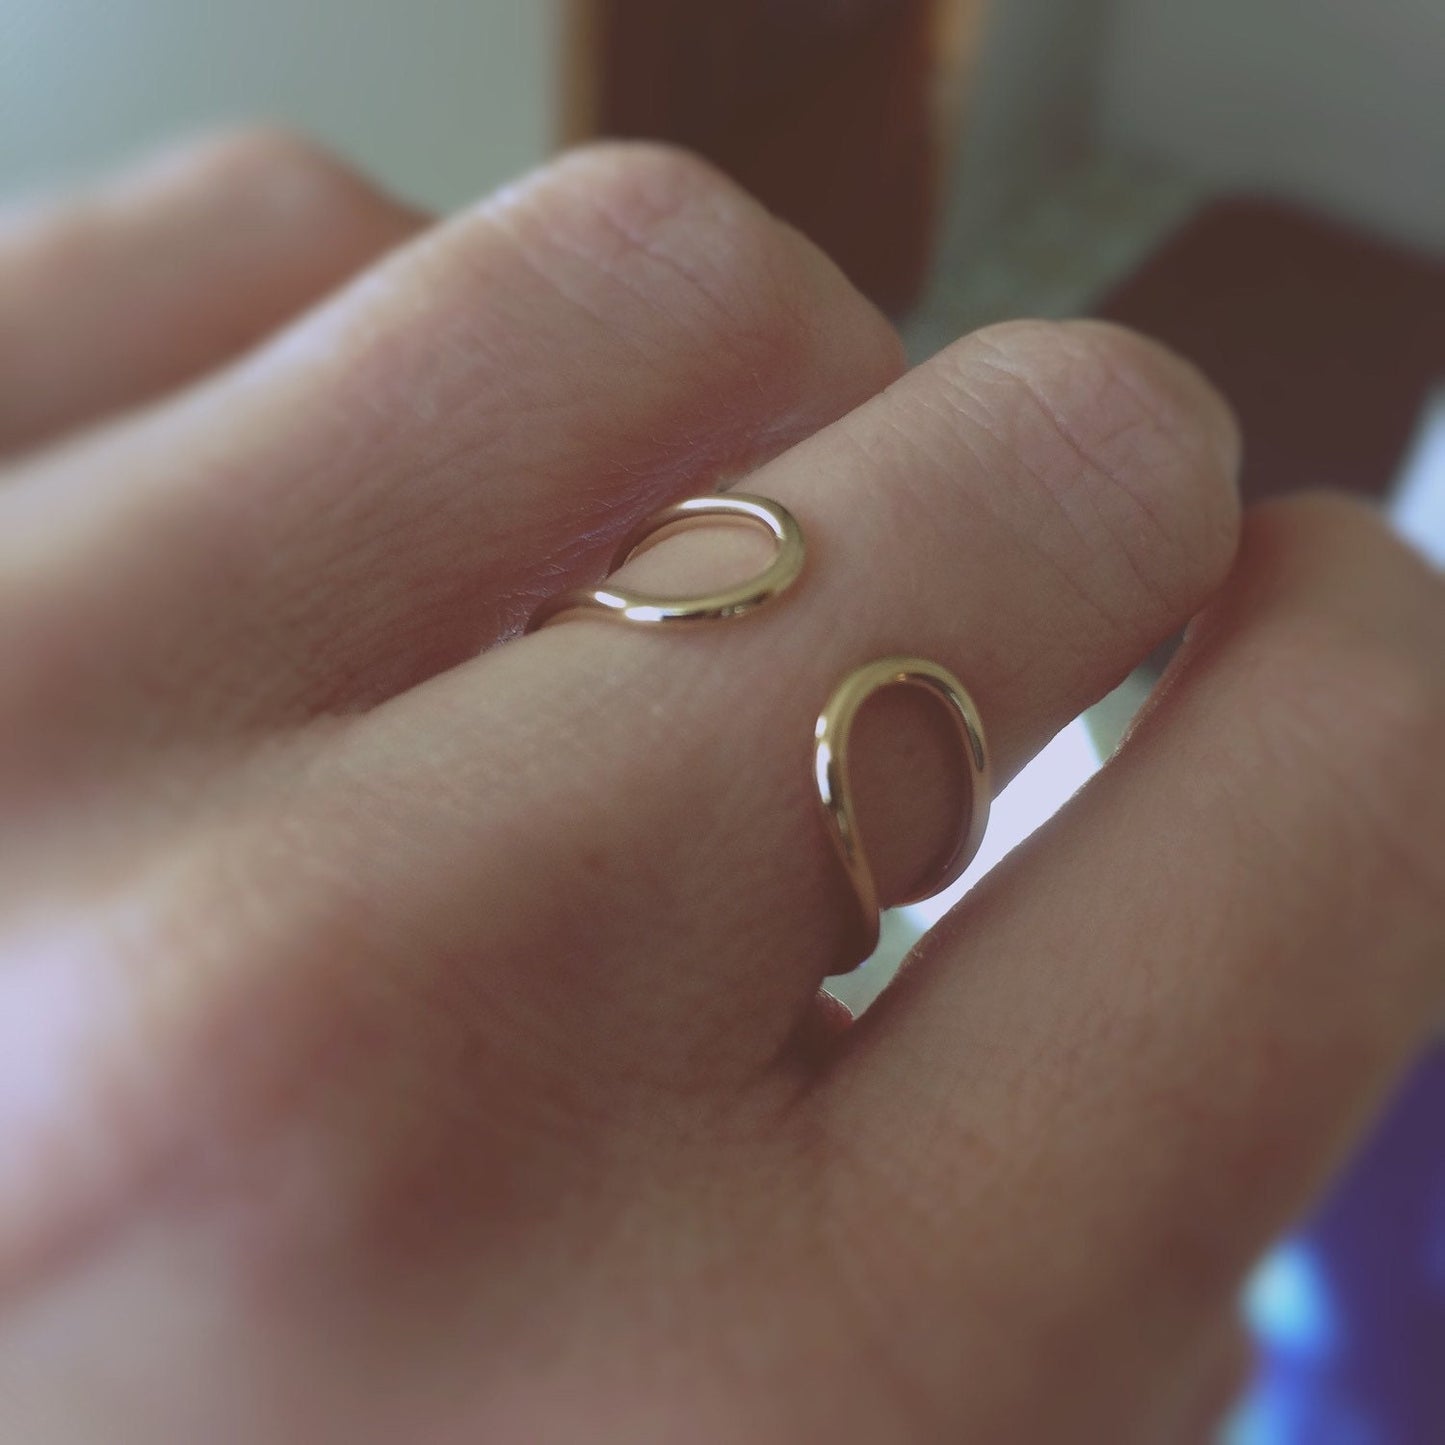 Open Ring, Minimalist Ring, Modern Ring, Double Line Ring, Simple Ring, Boho Ring, Statement Ring, Boho Chic, Open Loop Ring, Unique, U Ring